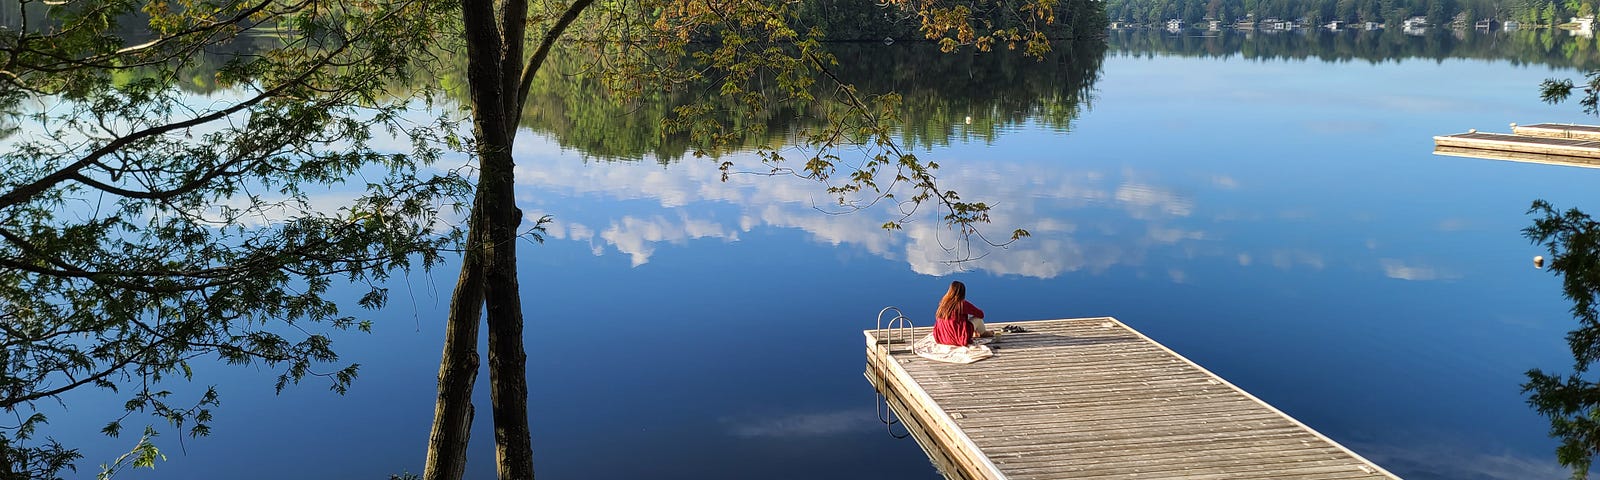 clear blue skies, a calm peaceful lake showing a reflection of the clouds and trees, and a woman sitting on the dock enjoying the view